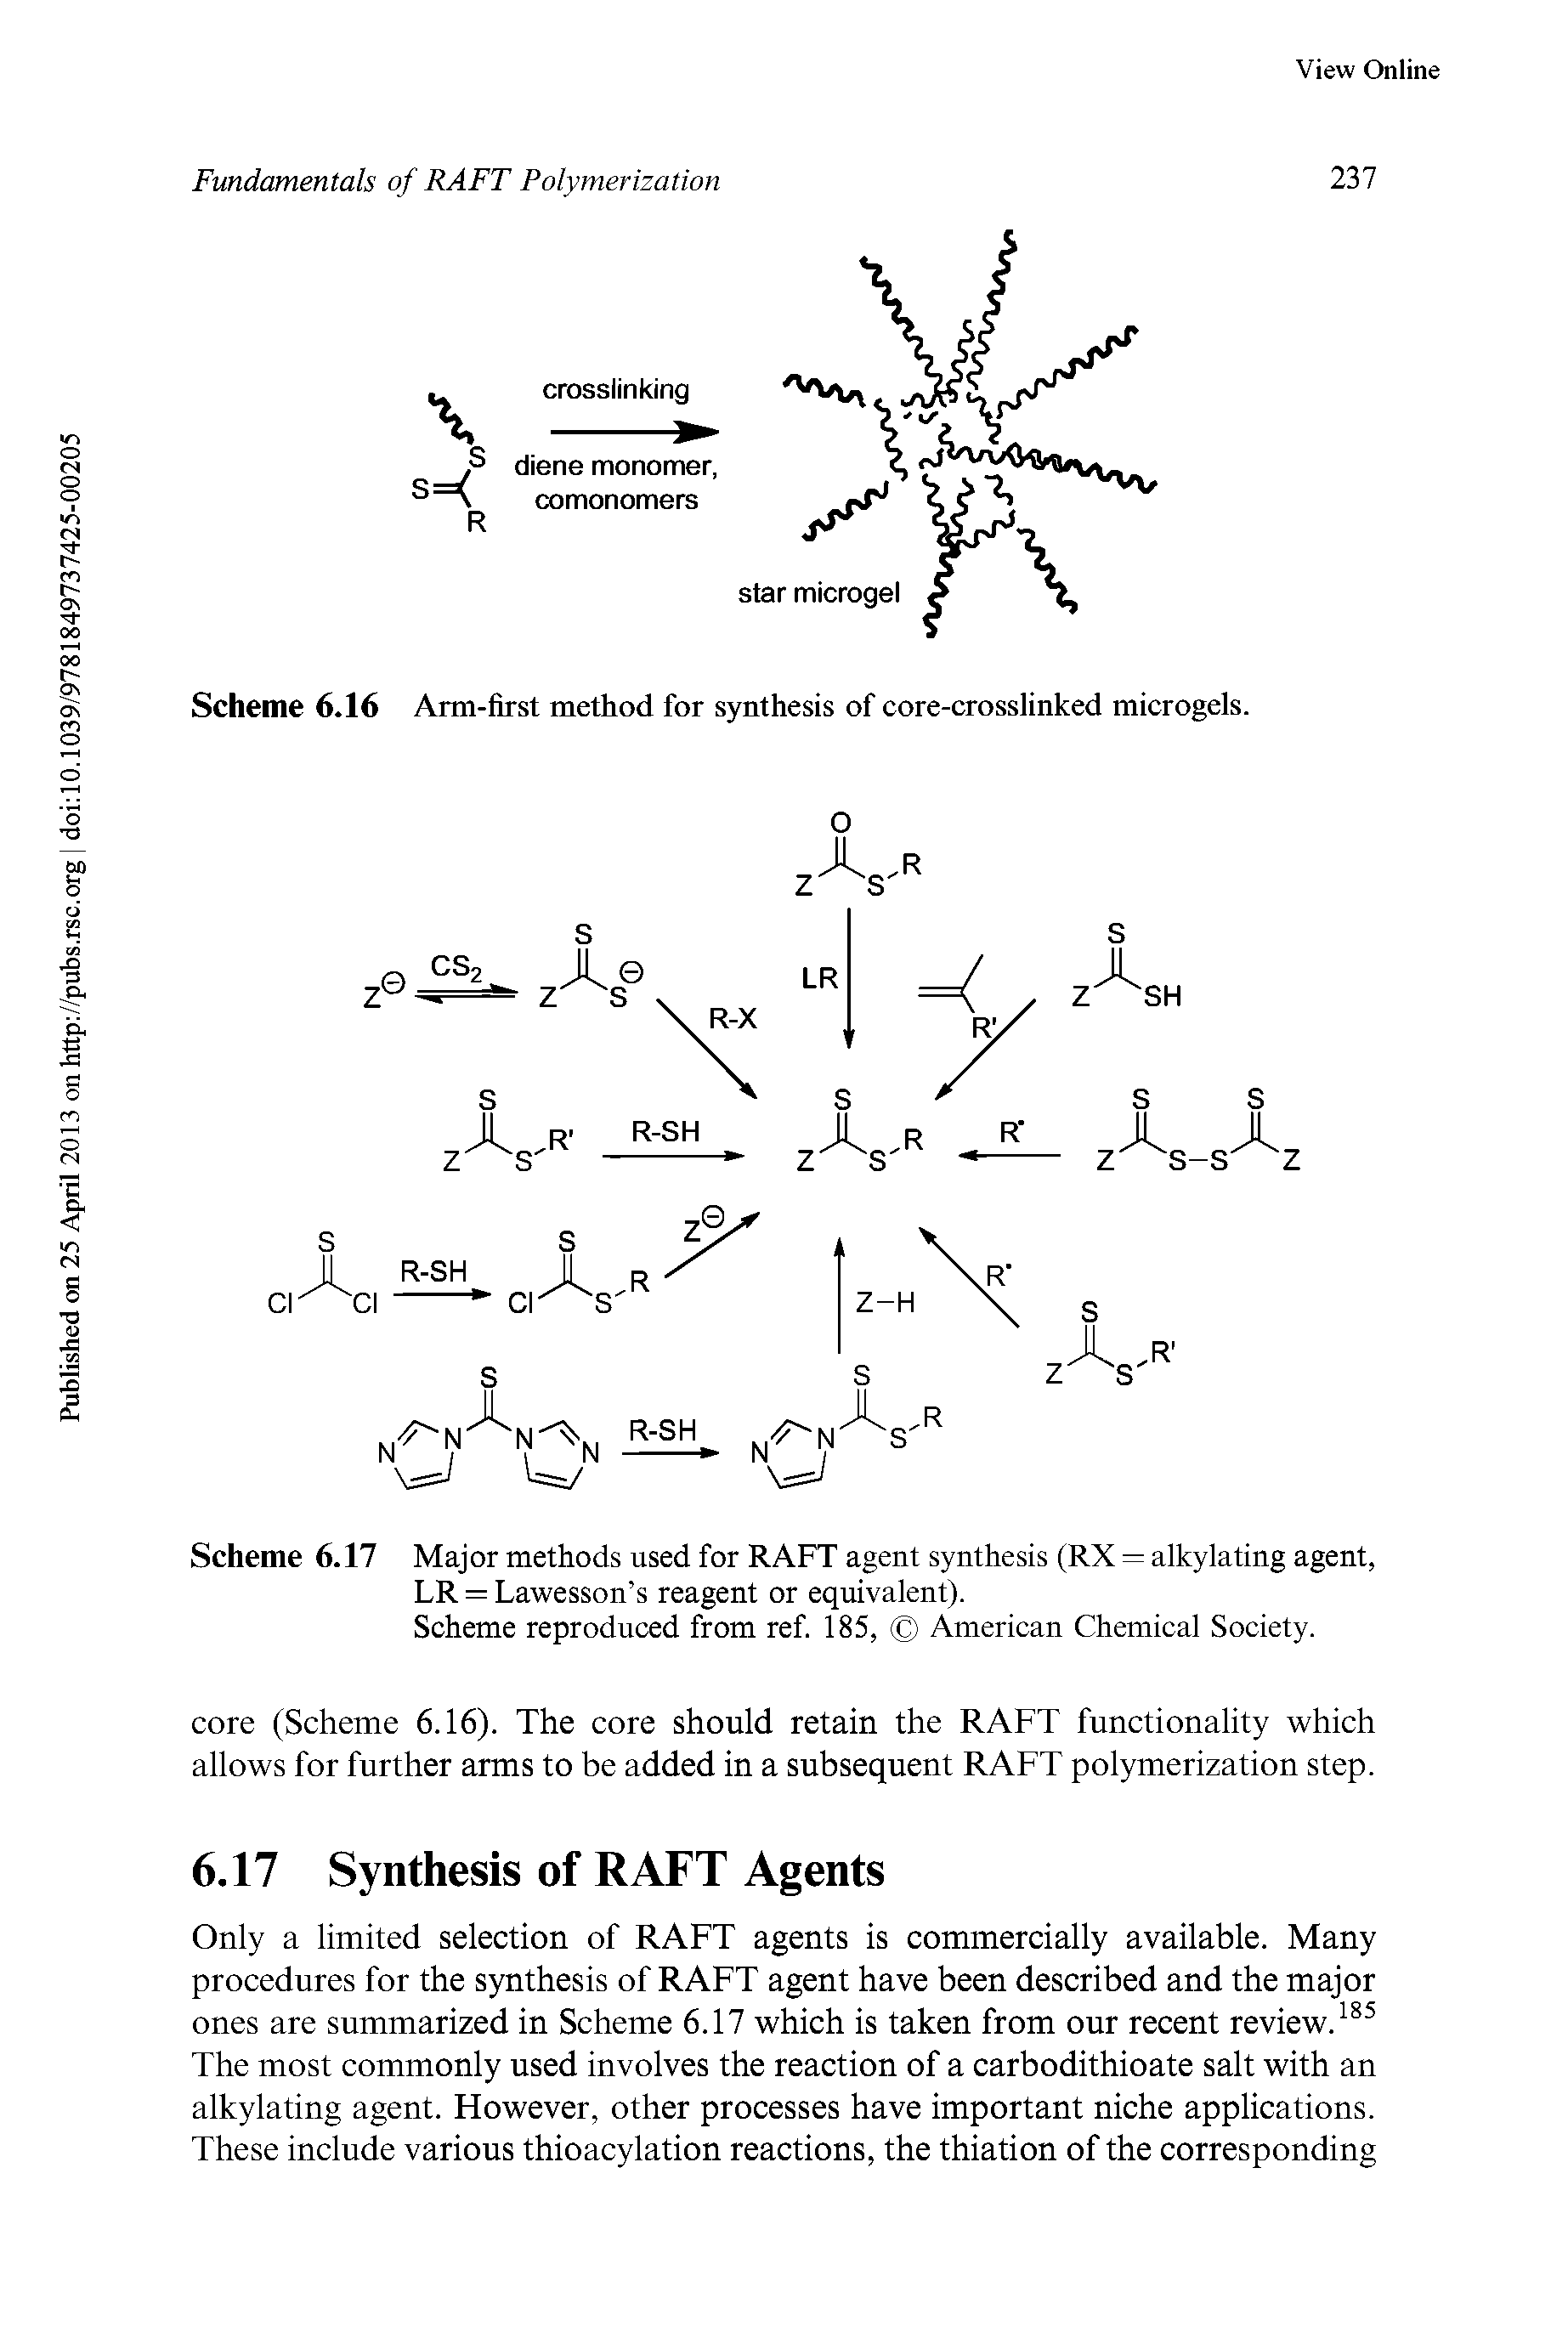 Scheme 6.17 Major methods used for RAFT agent synthesis (RX = alkylating agent, LR = Lawesson s reagent or equivalent).